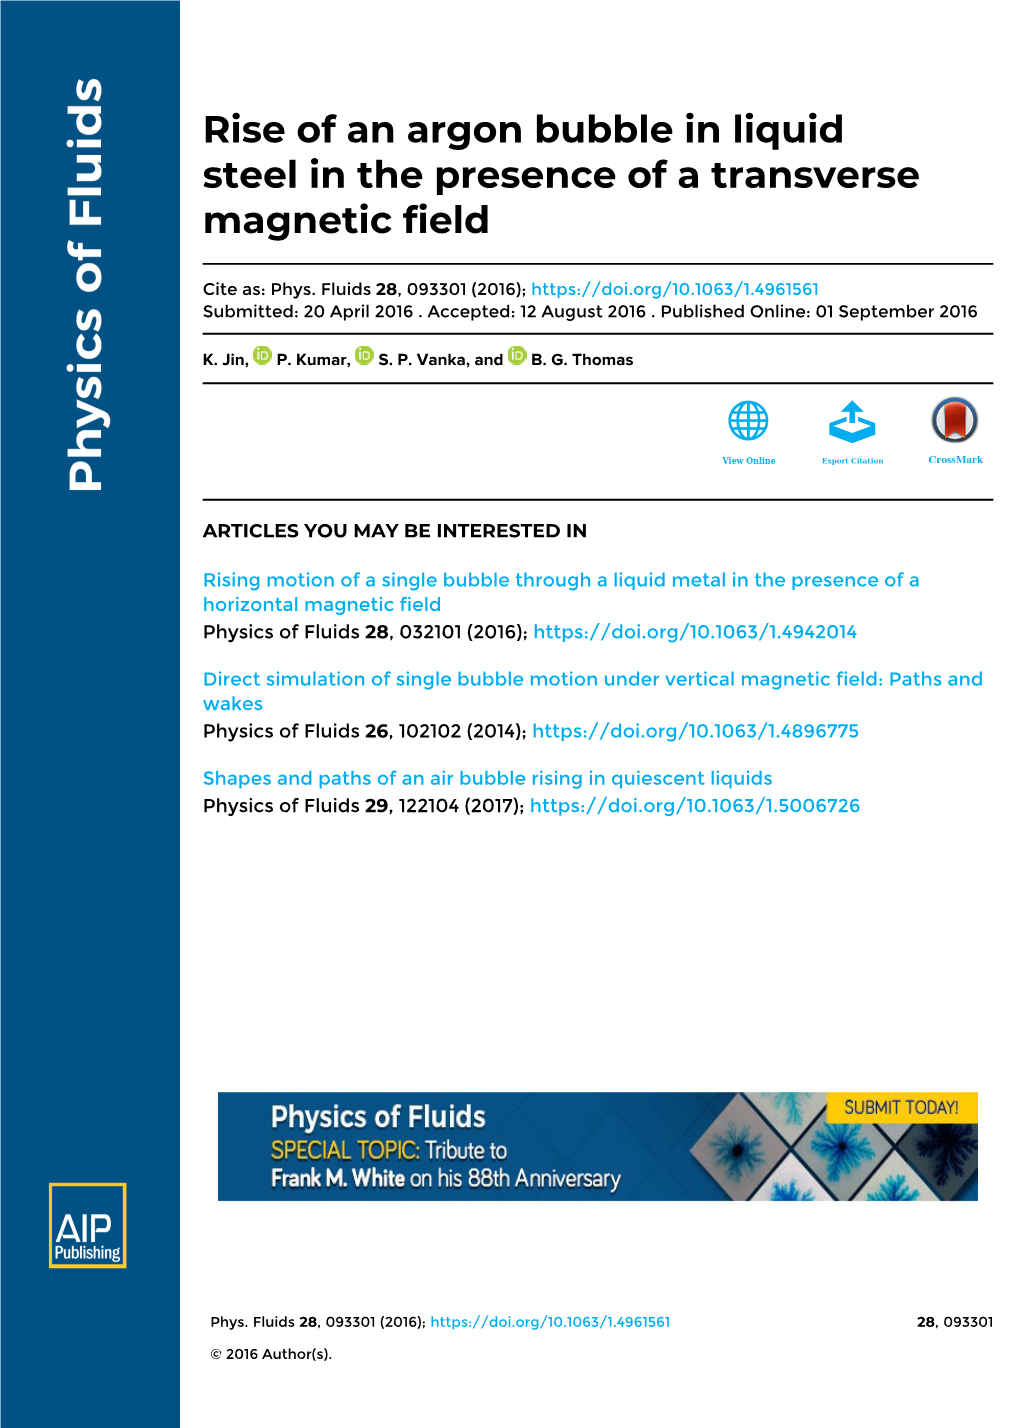 Rise of an Argon Bubble in Liquid Steel in the Presence of a Transverse Magnetic Field